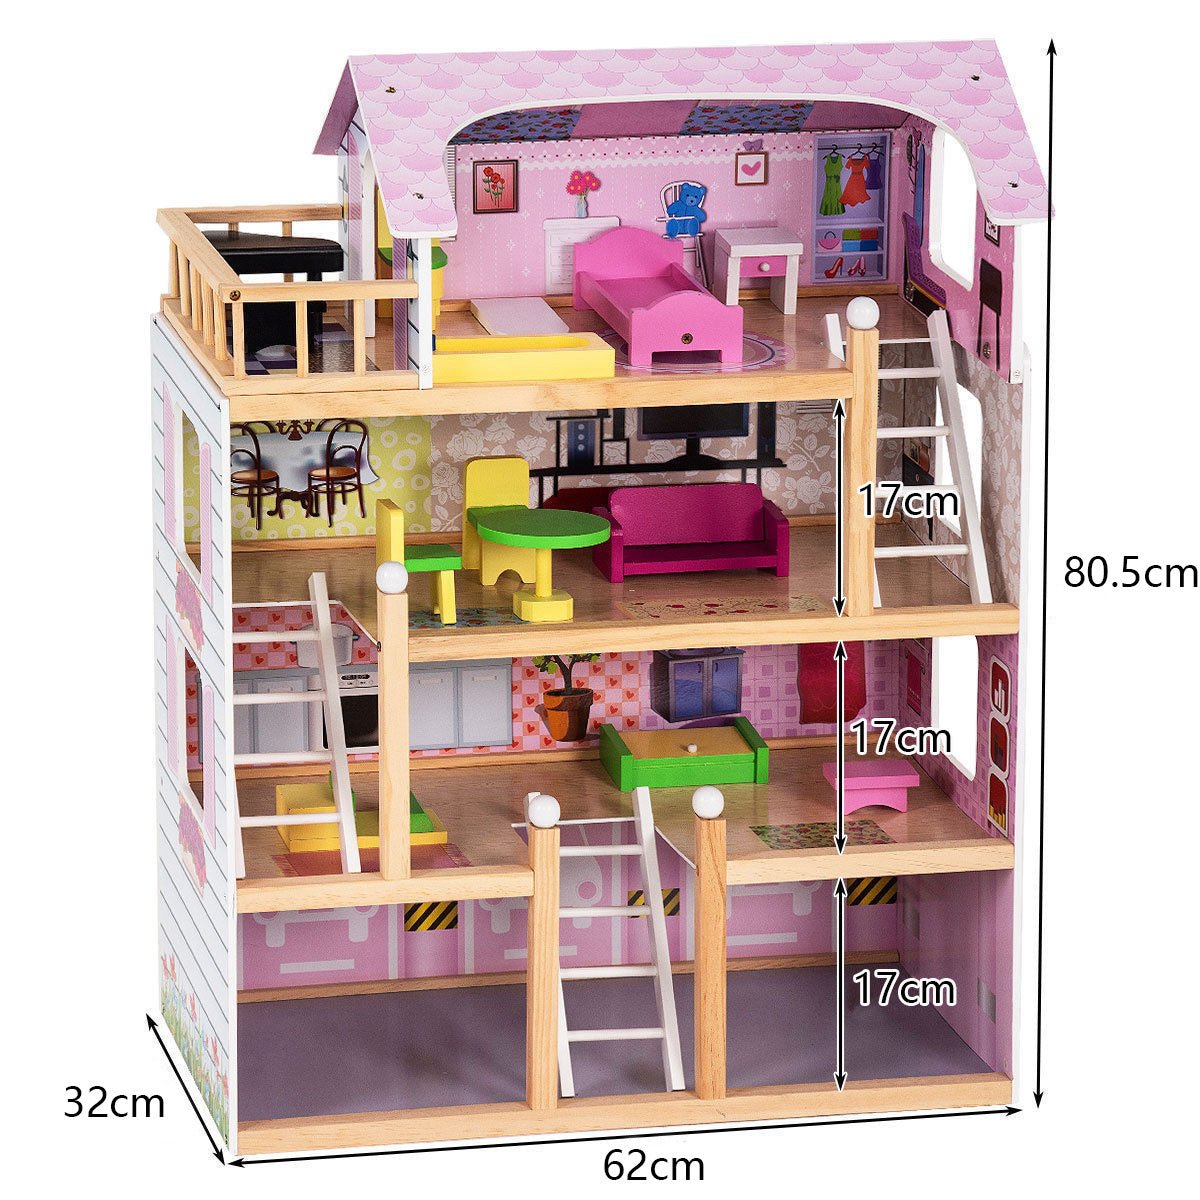 Explore and Play in a 4-Storey Wooden Doll House: Furnished Wonder